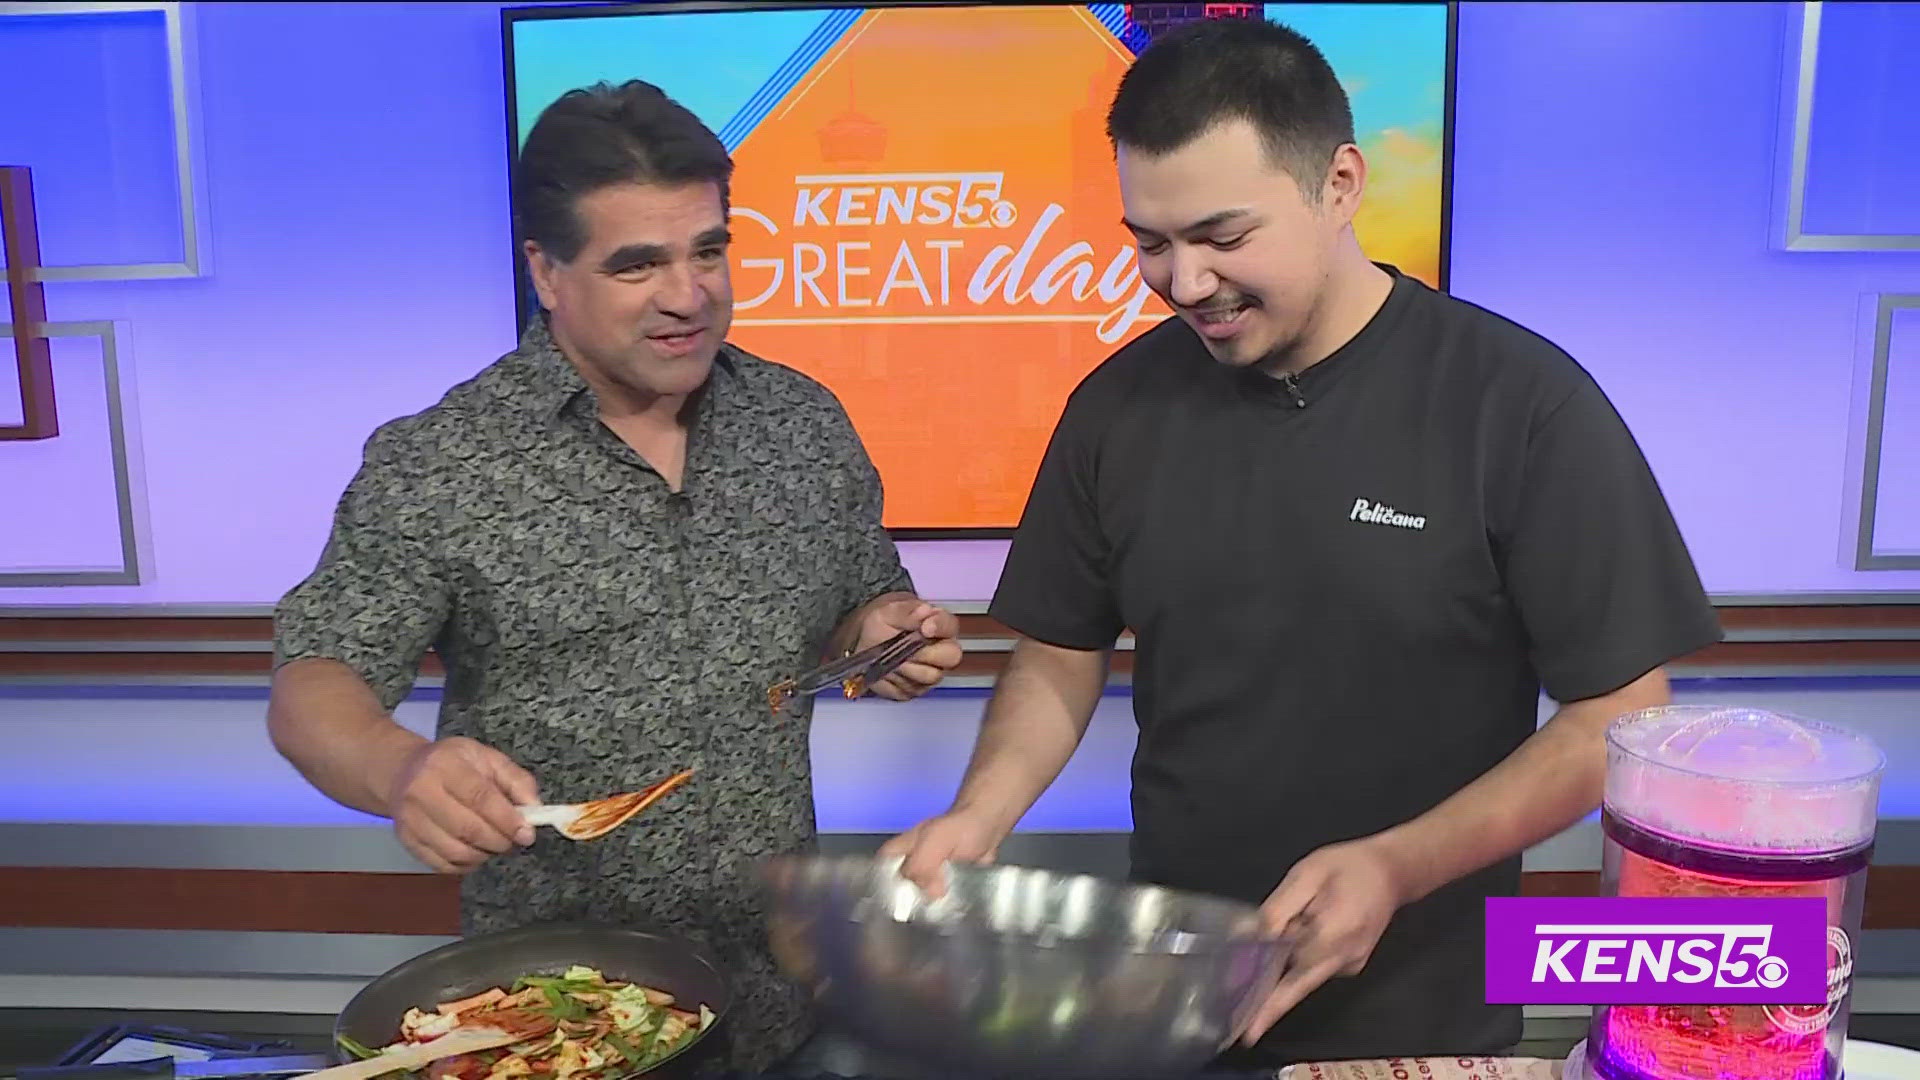 Paul helps make some Korean Fried Chicken with Juan Arenas from Pelicana Chicken.